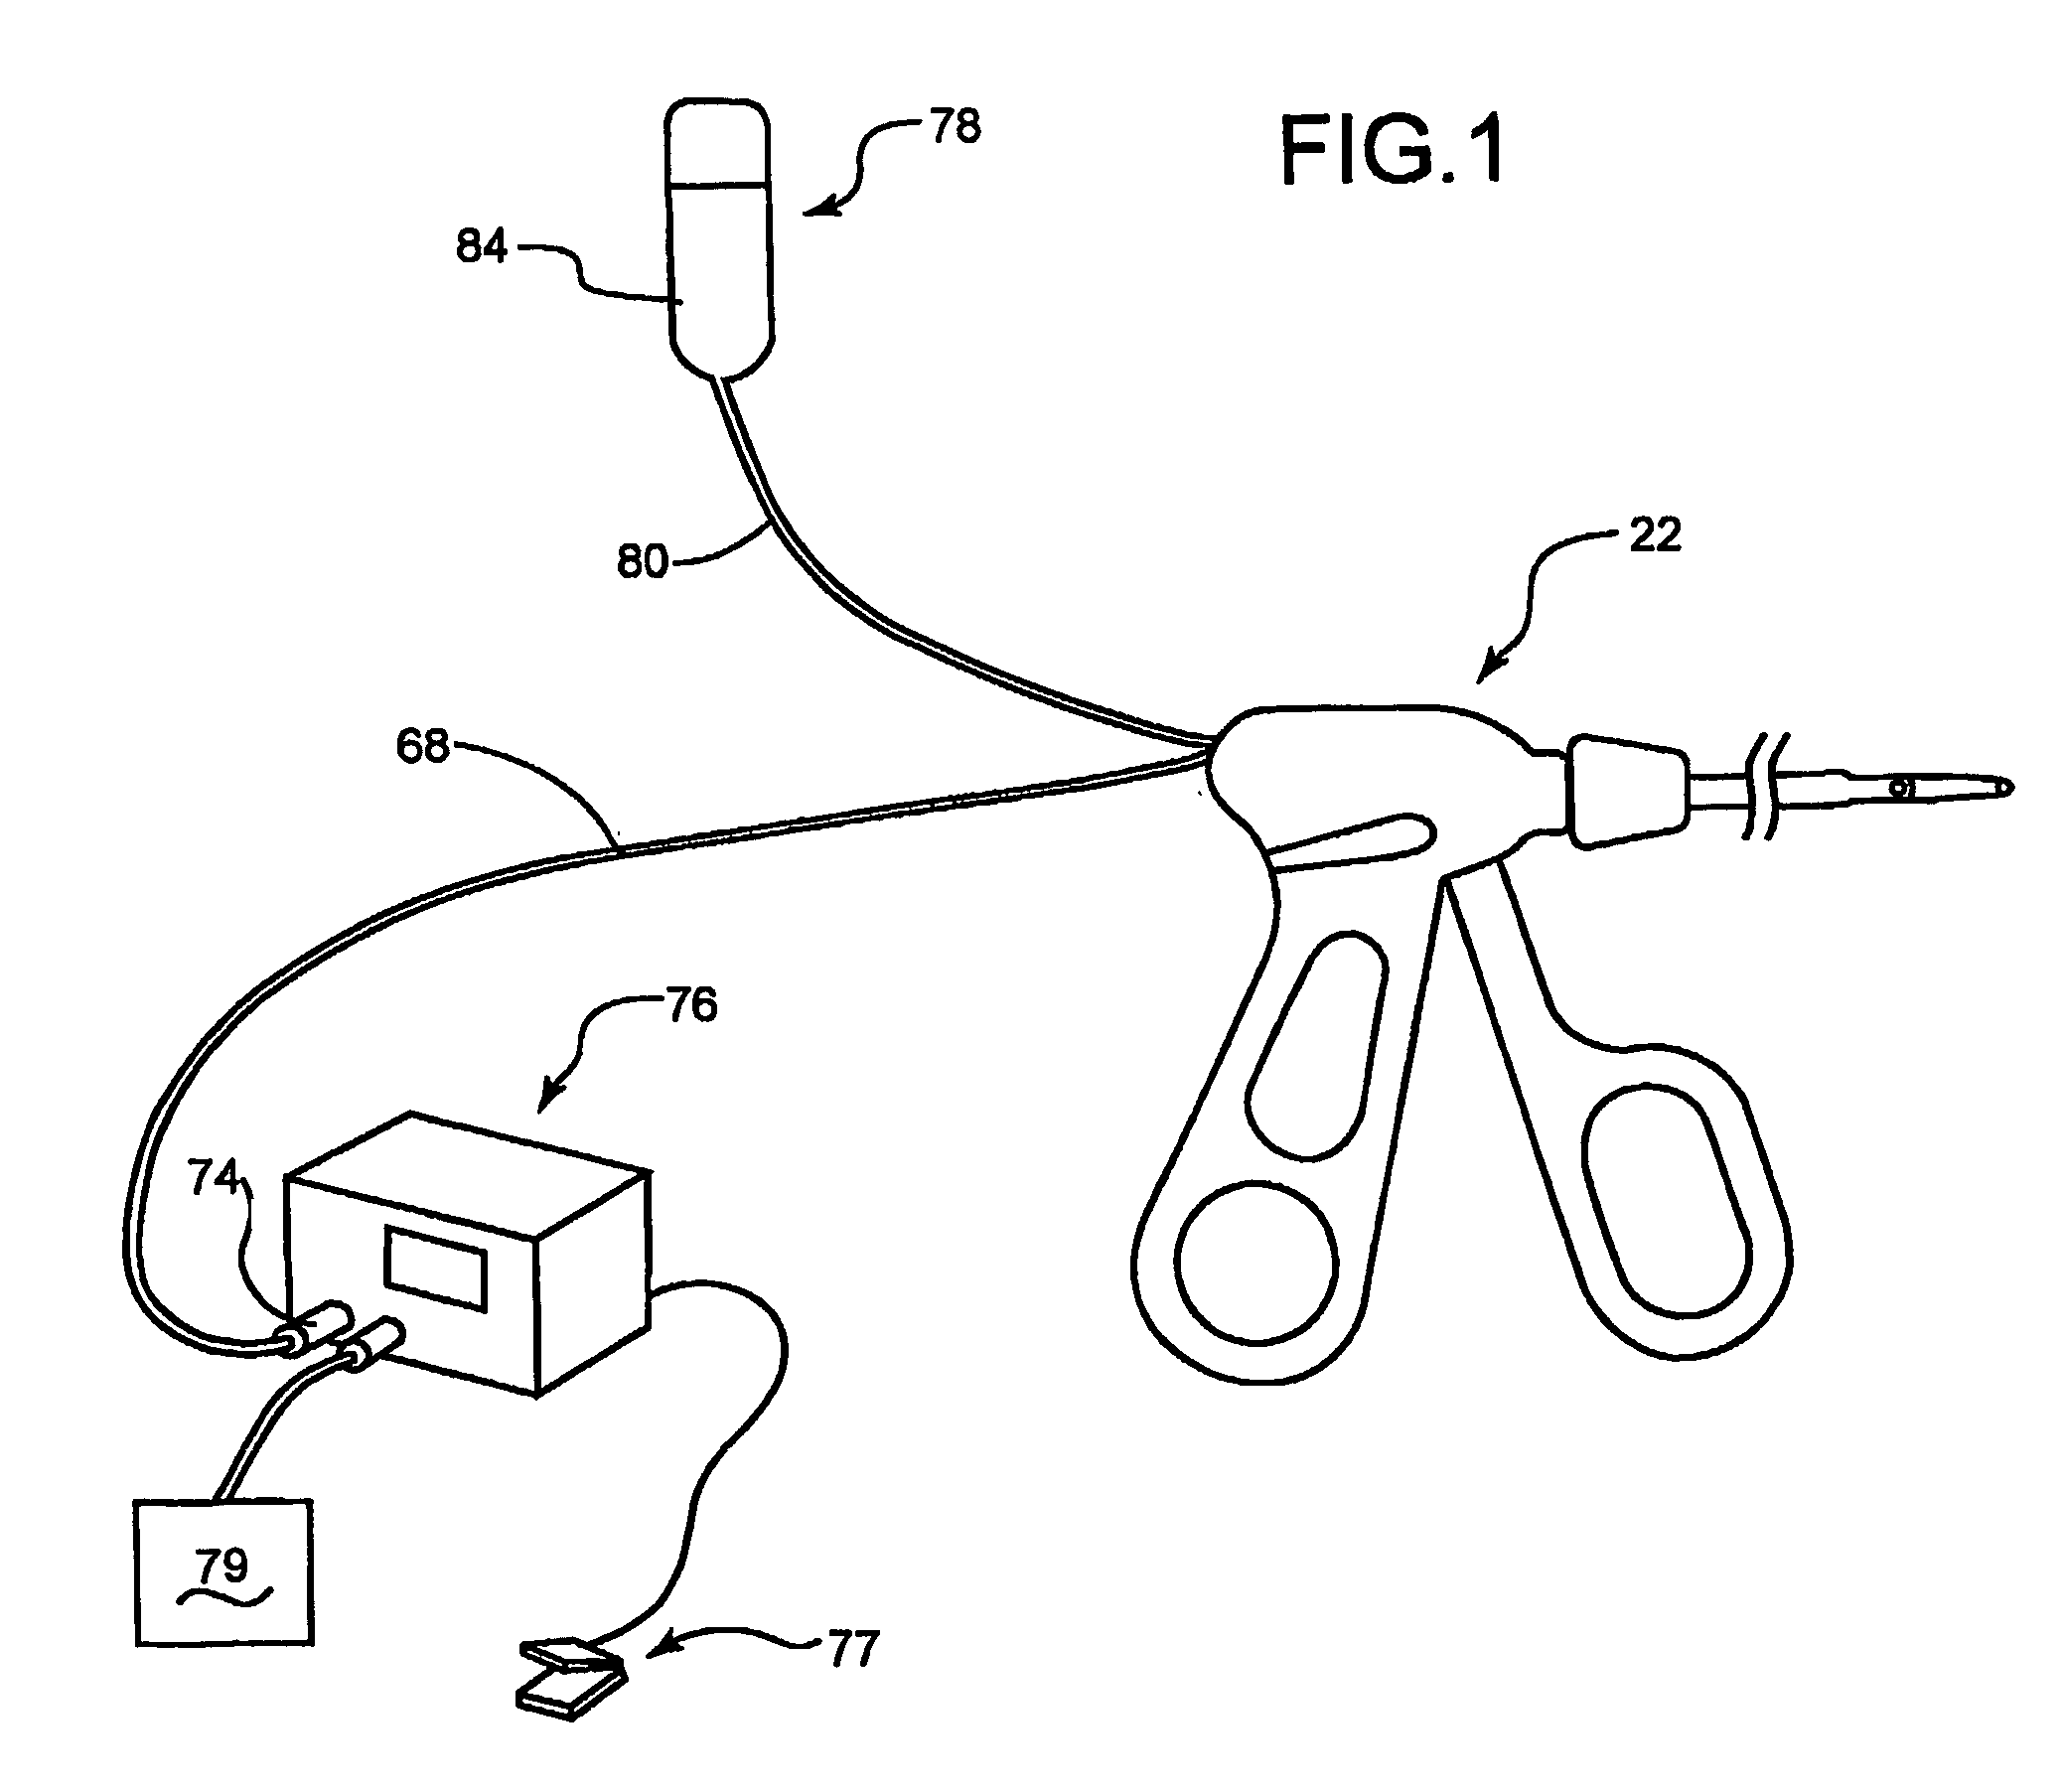 Fluid-assisted electrosurgical scissors and methods